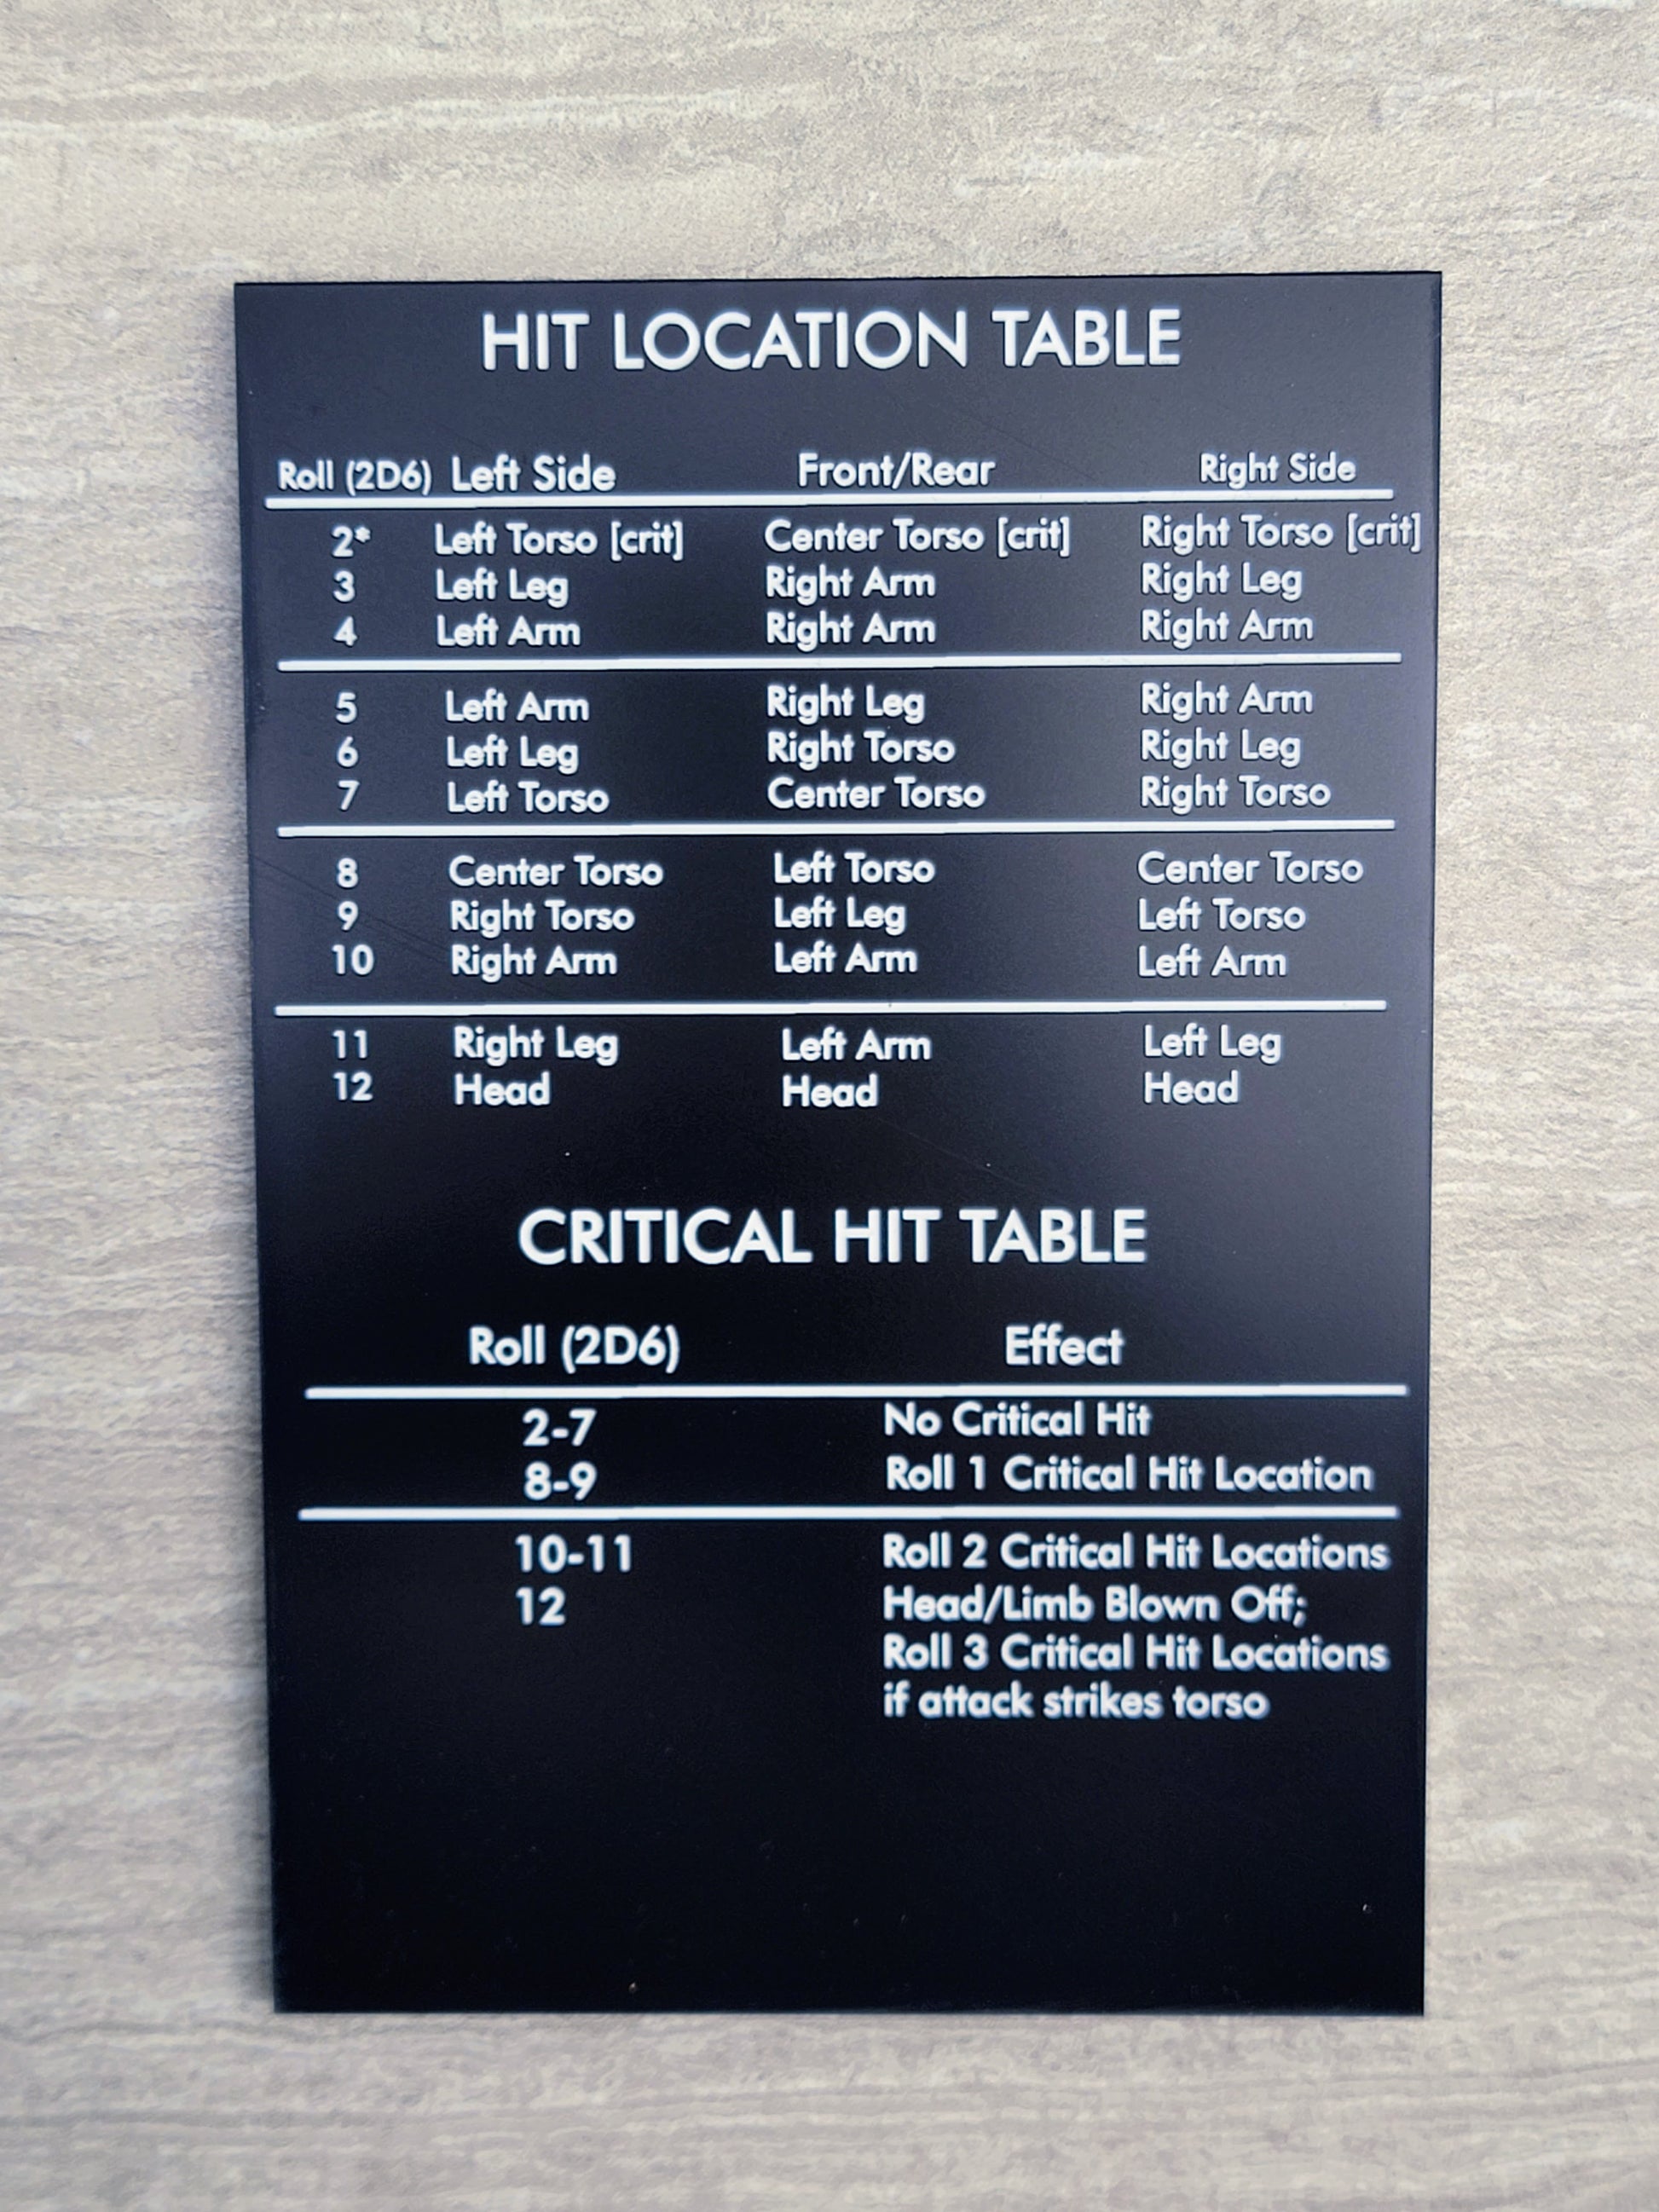 Hit location table on black laminate and gray background